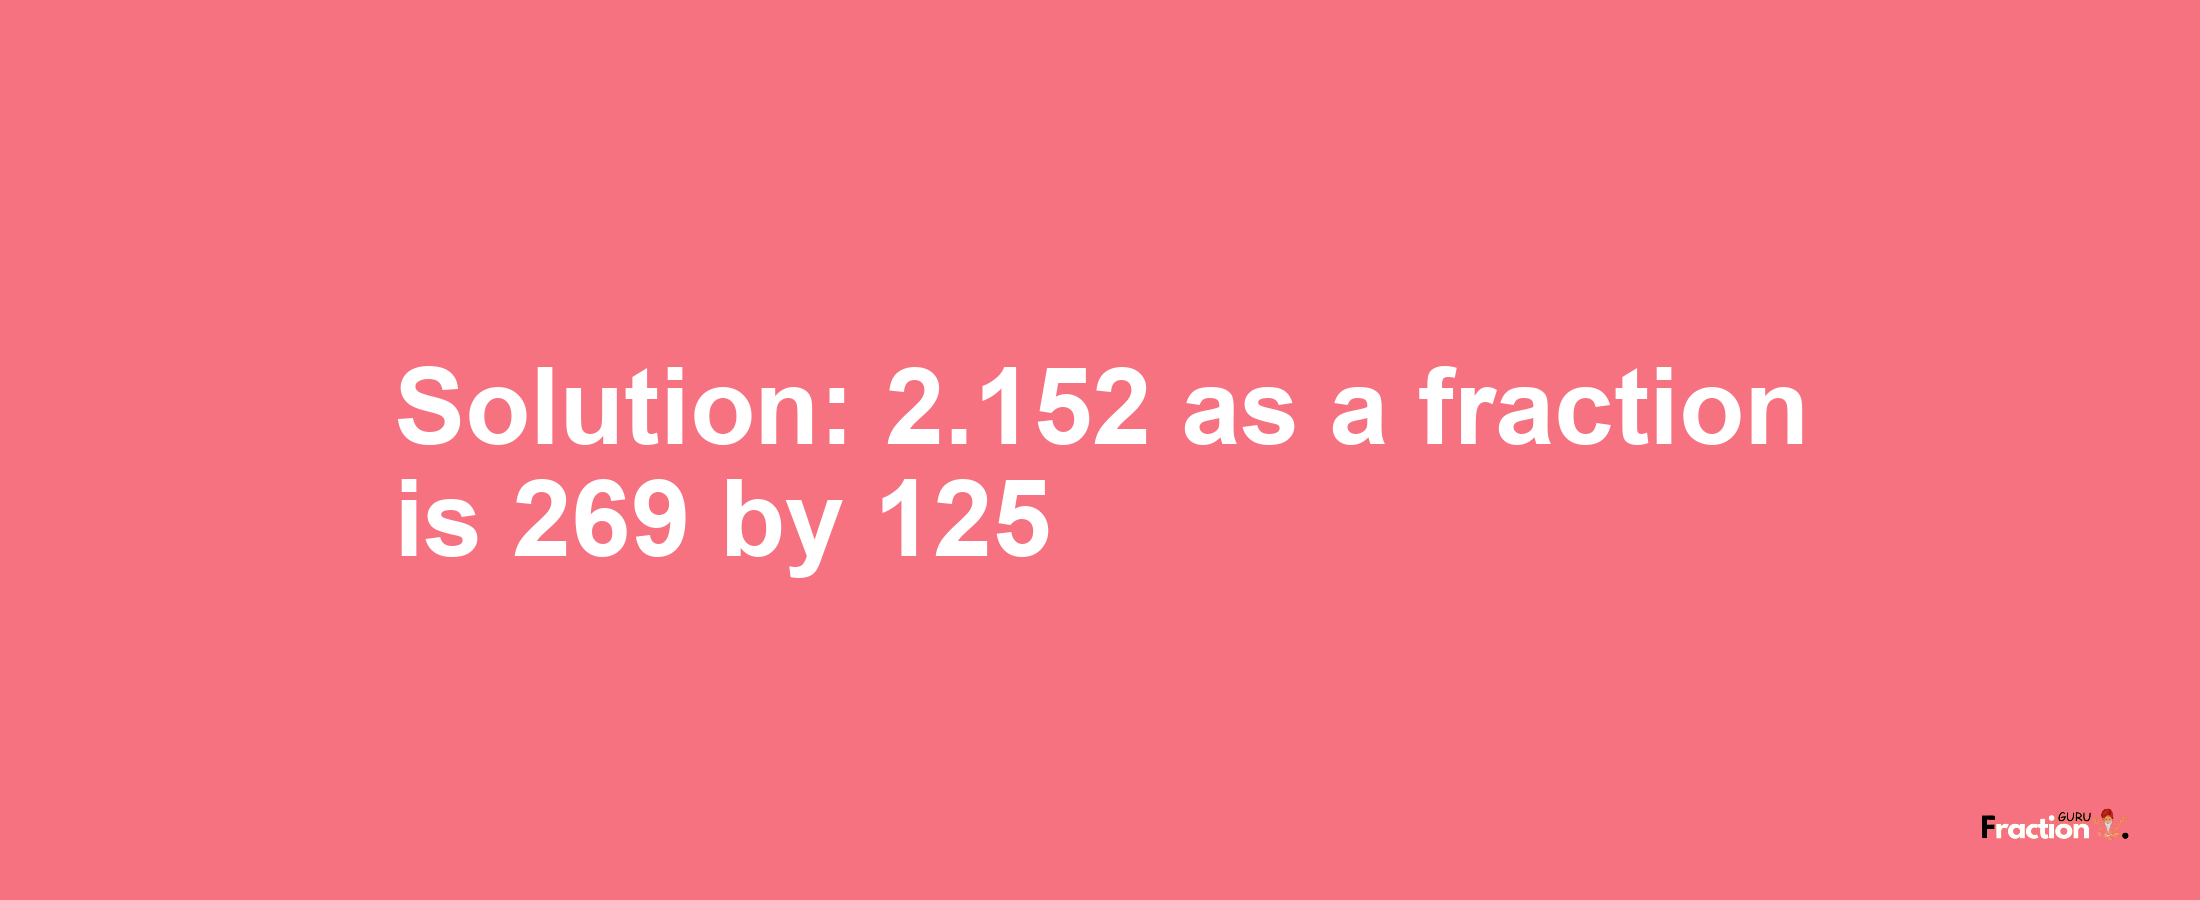 Solution:2.152 as a fraction is 269/125